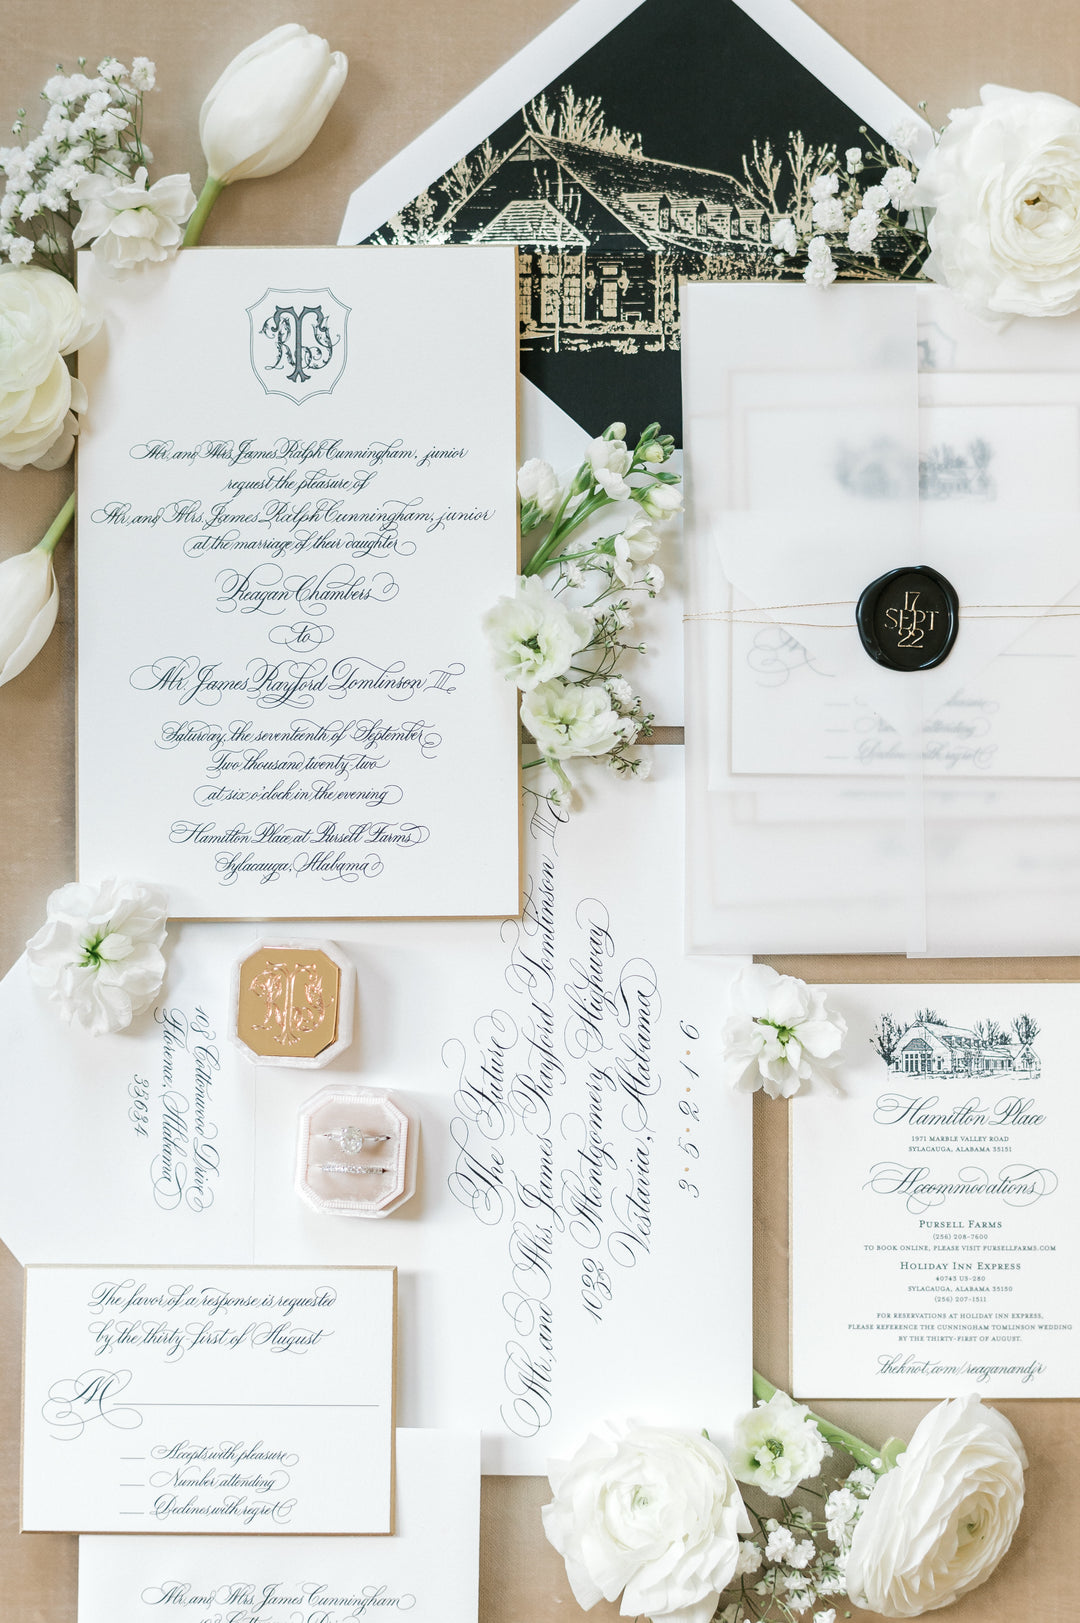 The Timeless Elegance of a Chic and Classic Southern Wedding